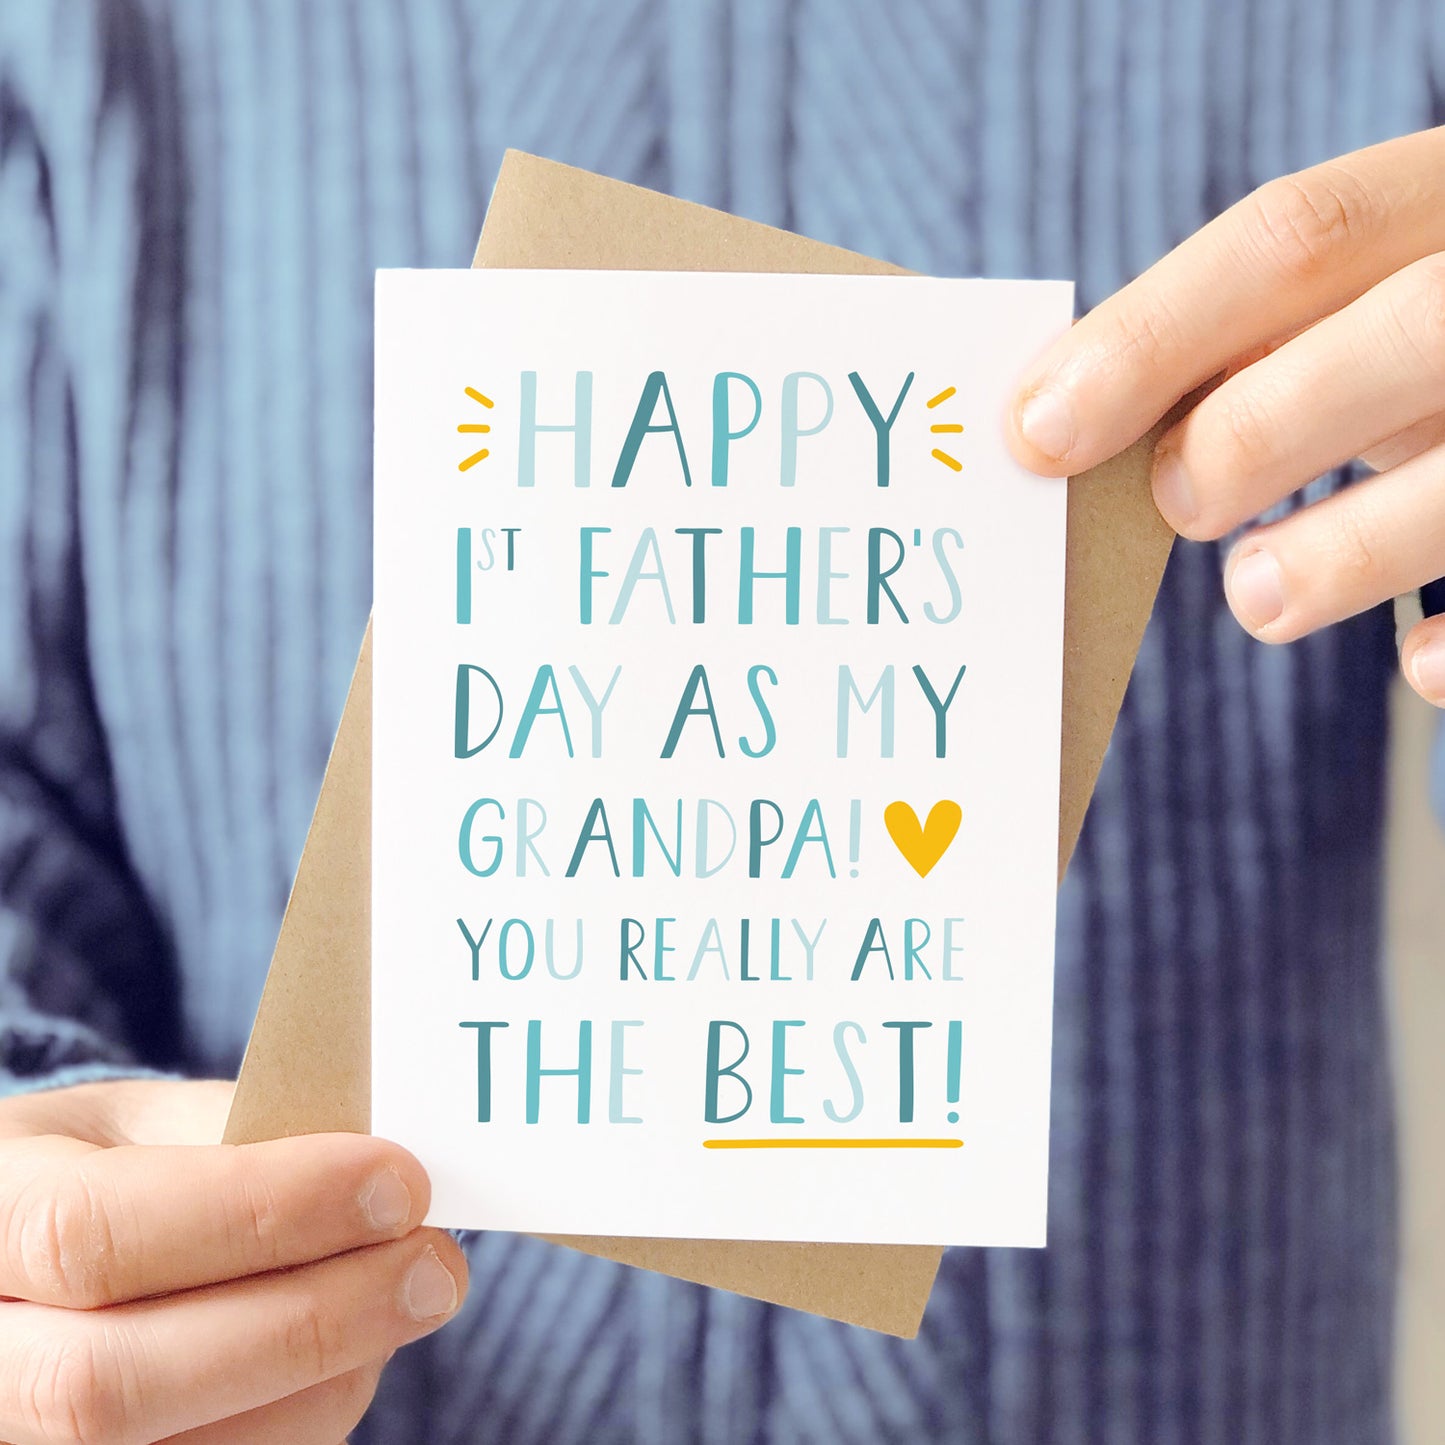 'Happy 1st Father's Day as my Grandpa! You really are the best!' Photographed being held in front of a man wearing a grey blue knitted jumper and being held with it's kraft brown envelope.